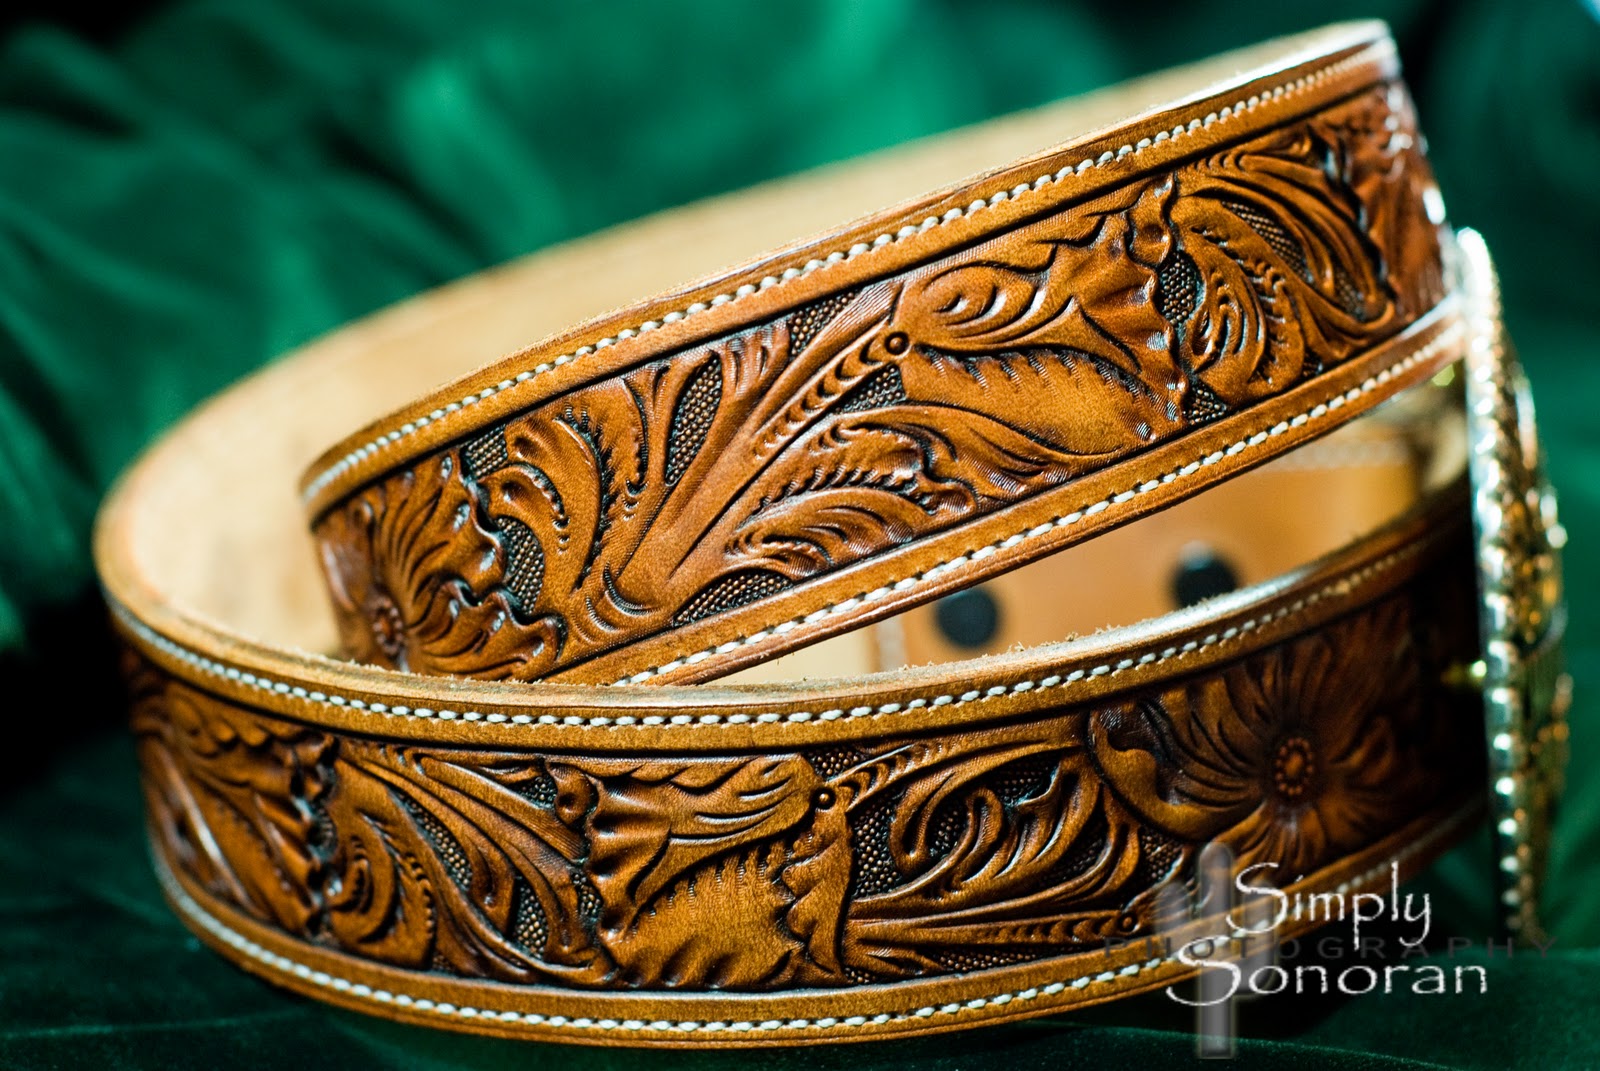 Simply Sonoran Photography: Tanner Custom Leather: Belt 1